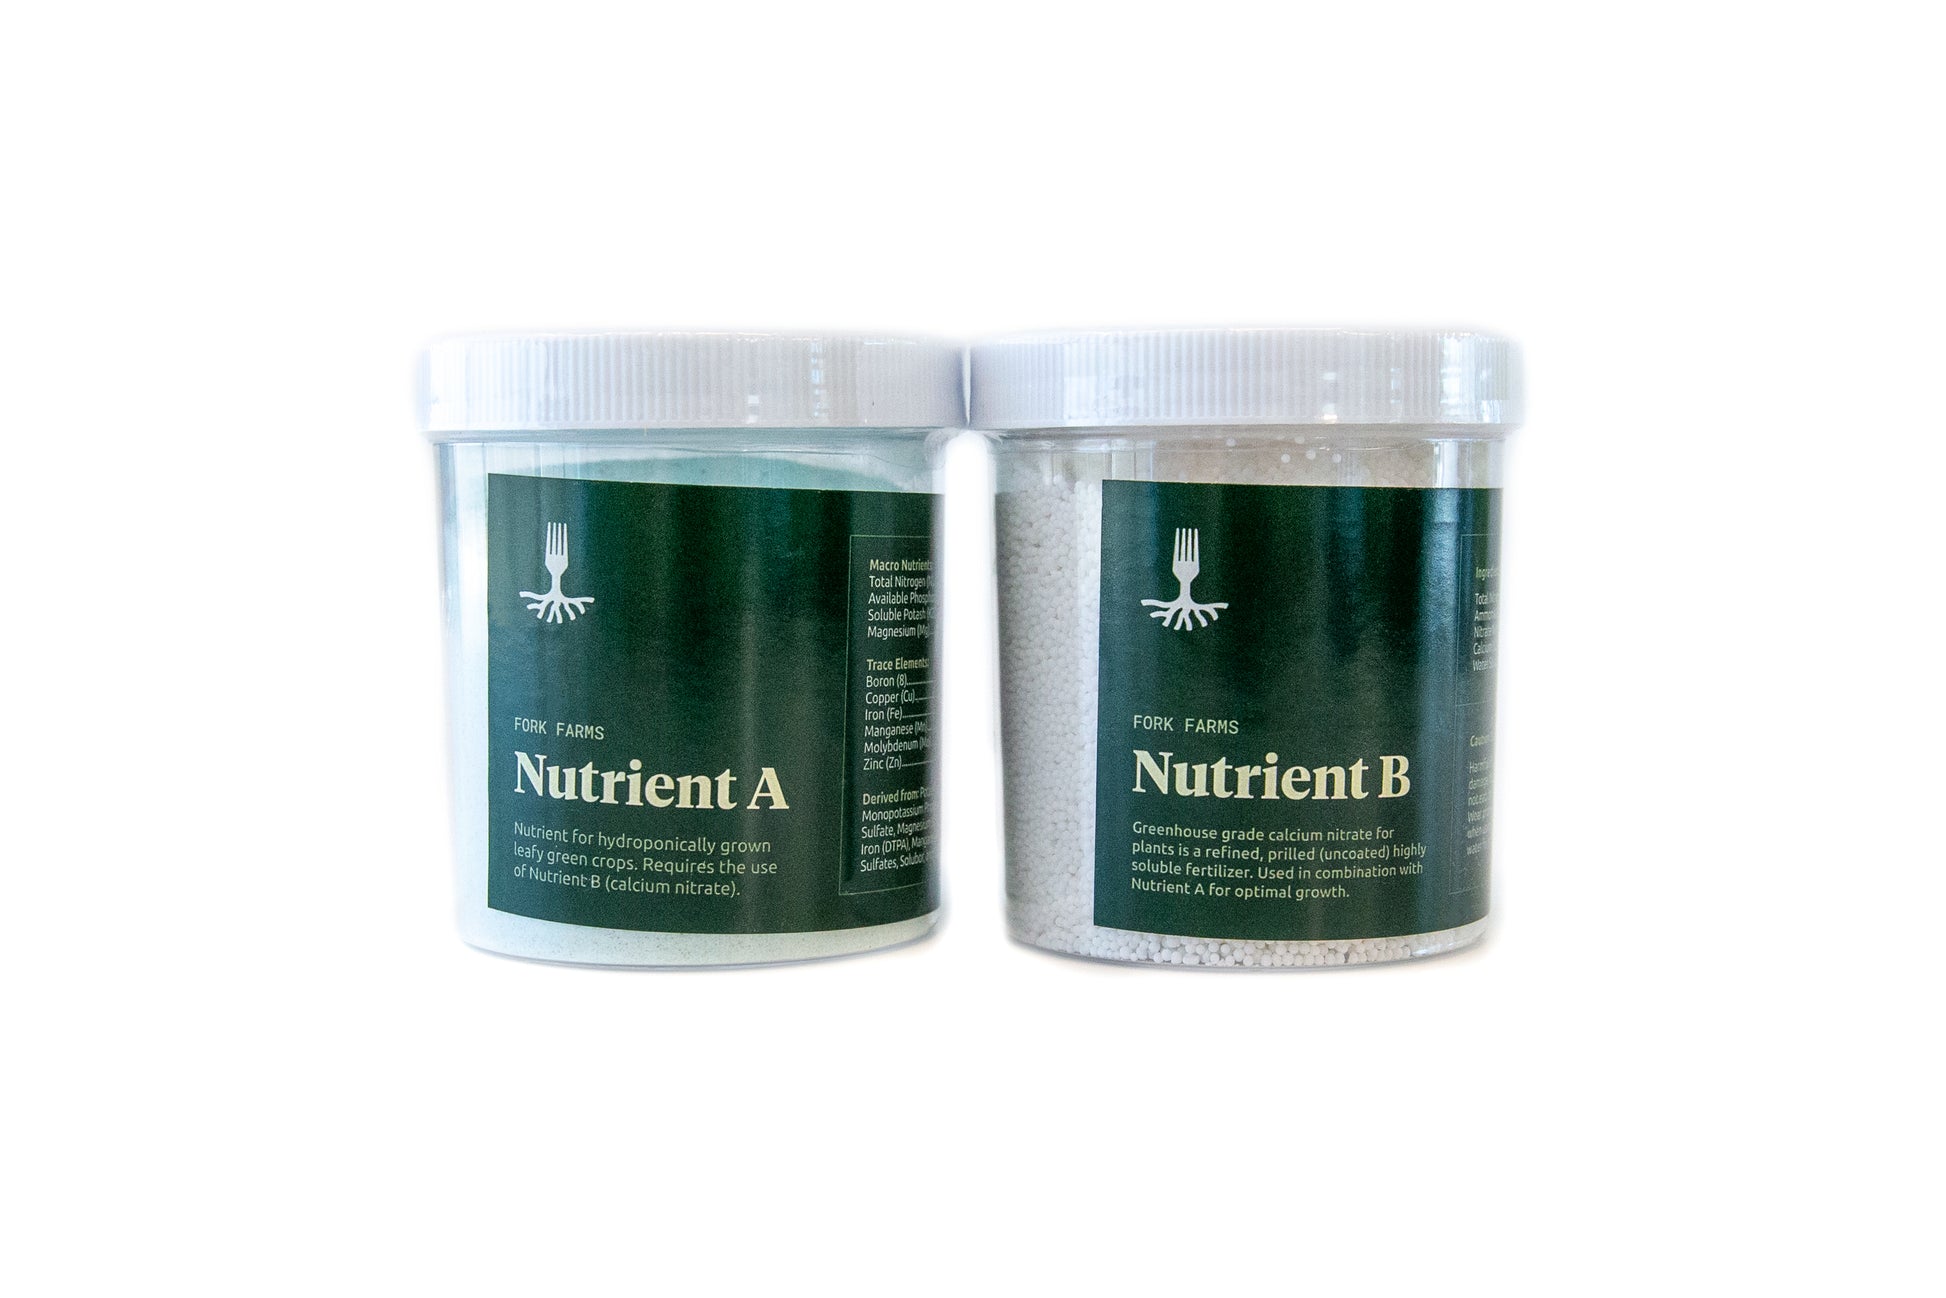 Image of 1 lb. of nutrient a and 1 lb. of nutrient b